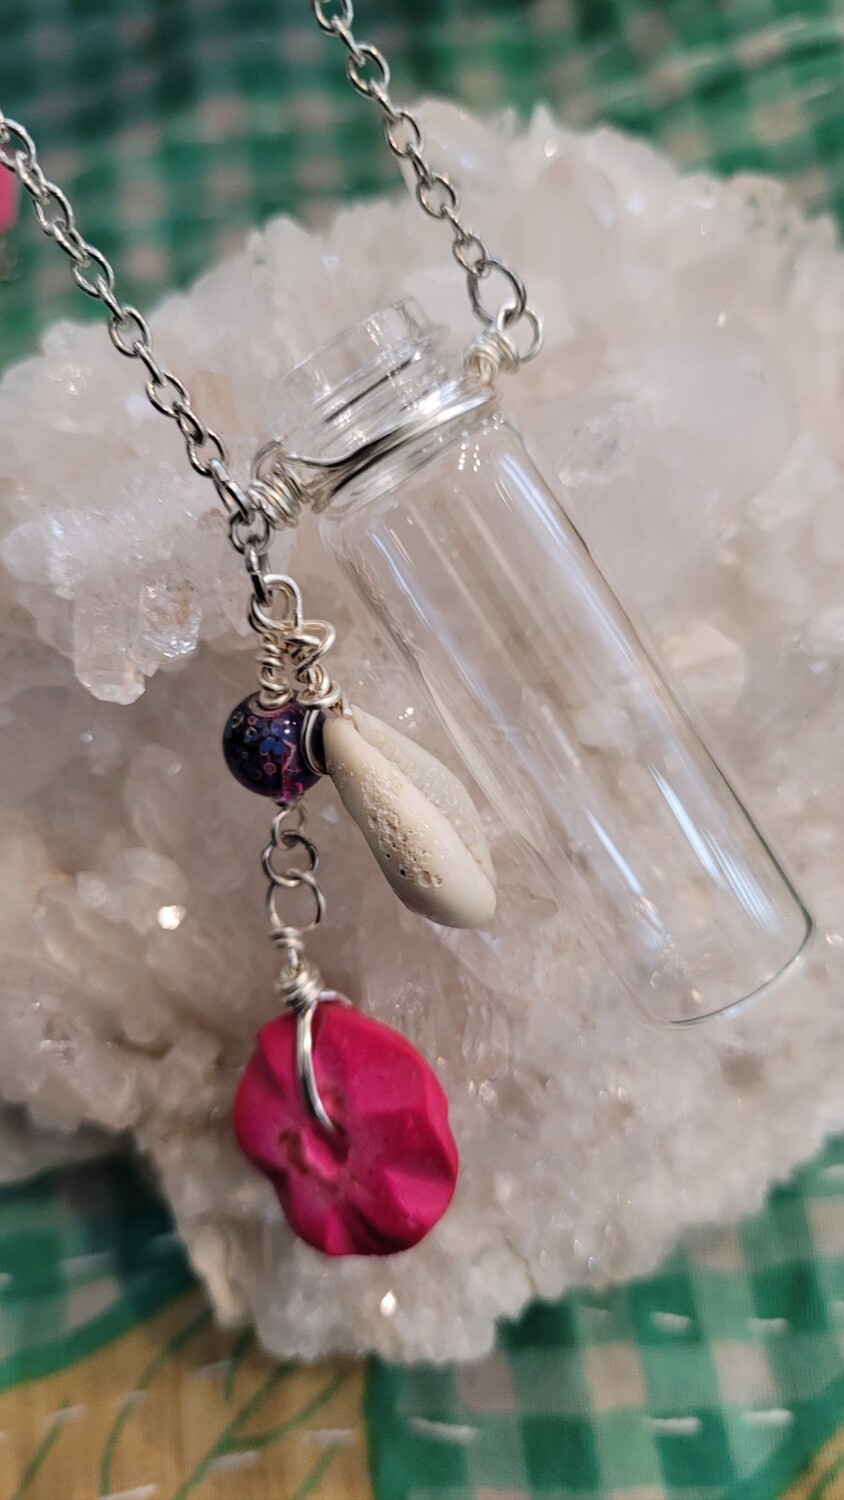 Vintage Vial Necklace featuring Cowrie Shell, Upcycled Beads and Charms